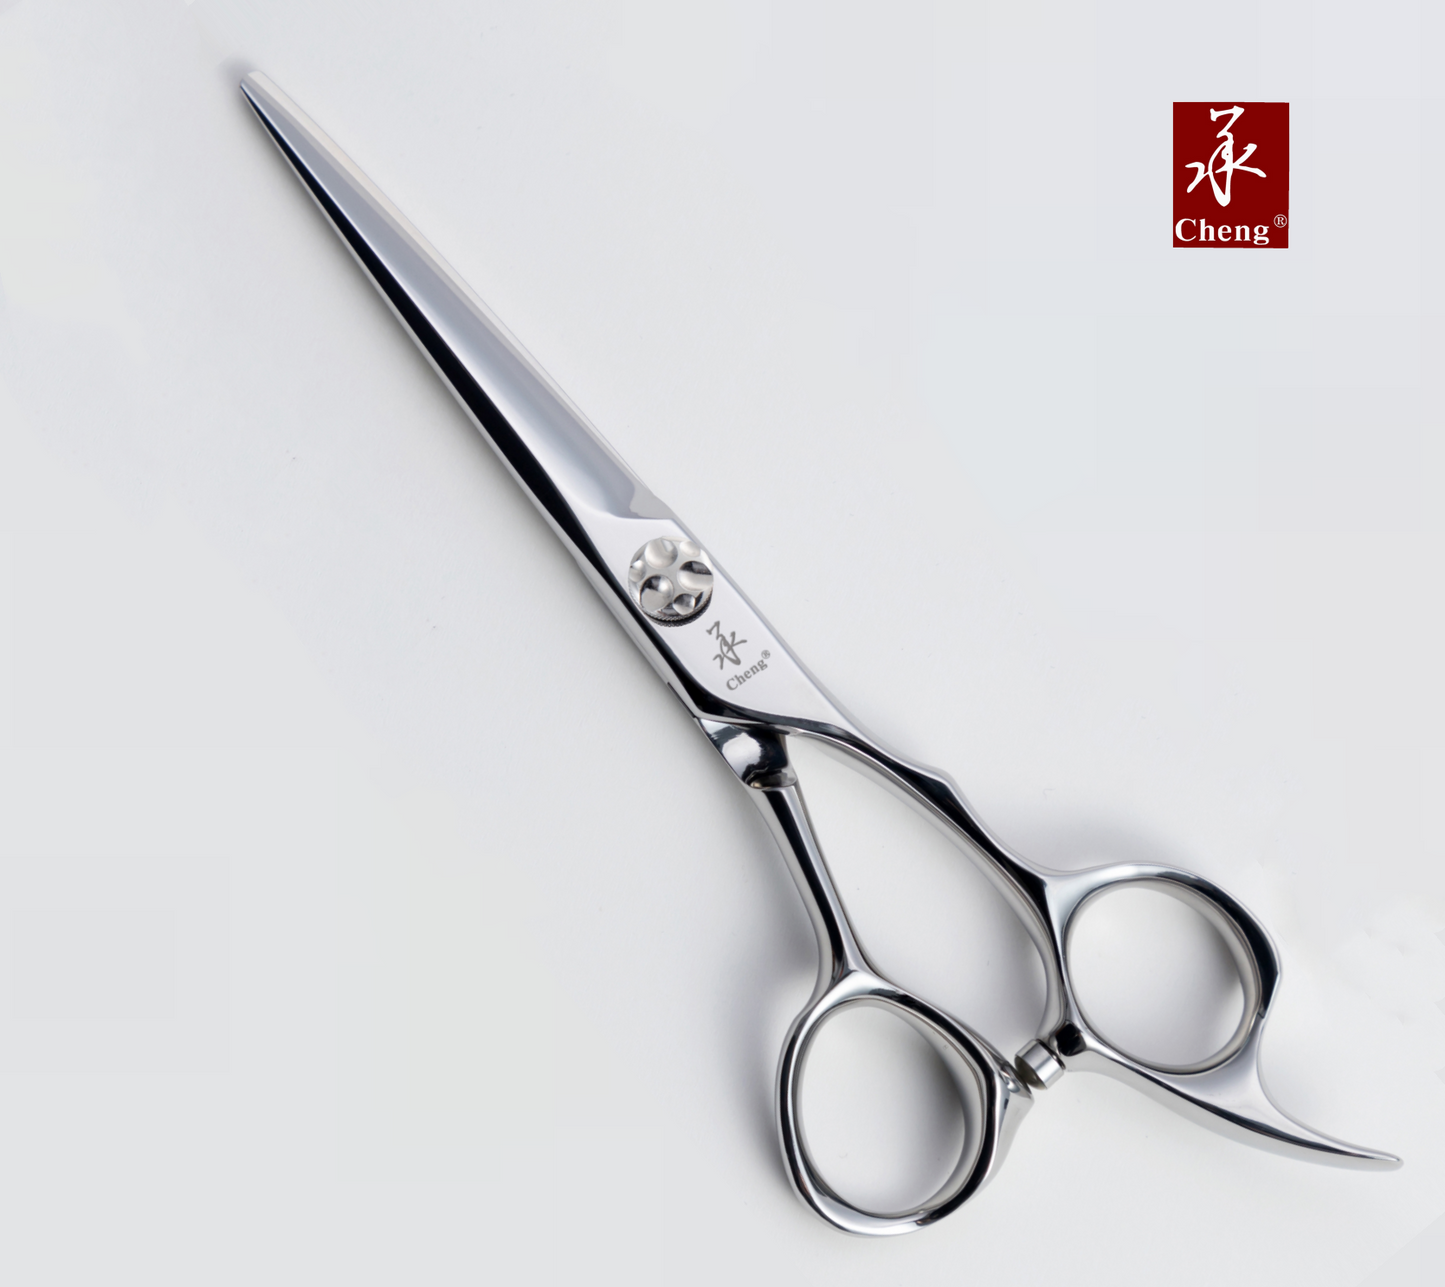 VD-625XS Hair Thinning Scissors 6.0 Inch 25T About=10%